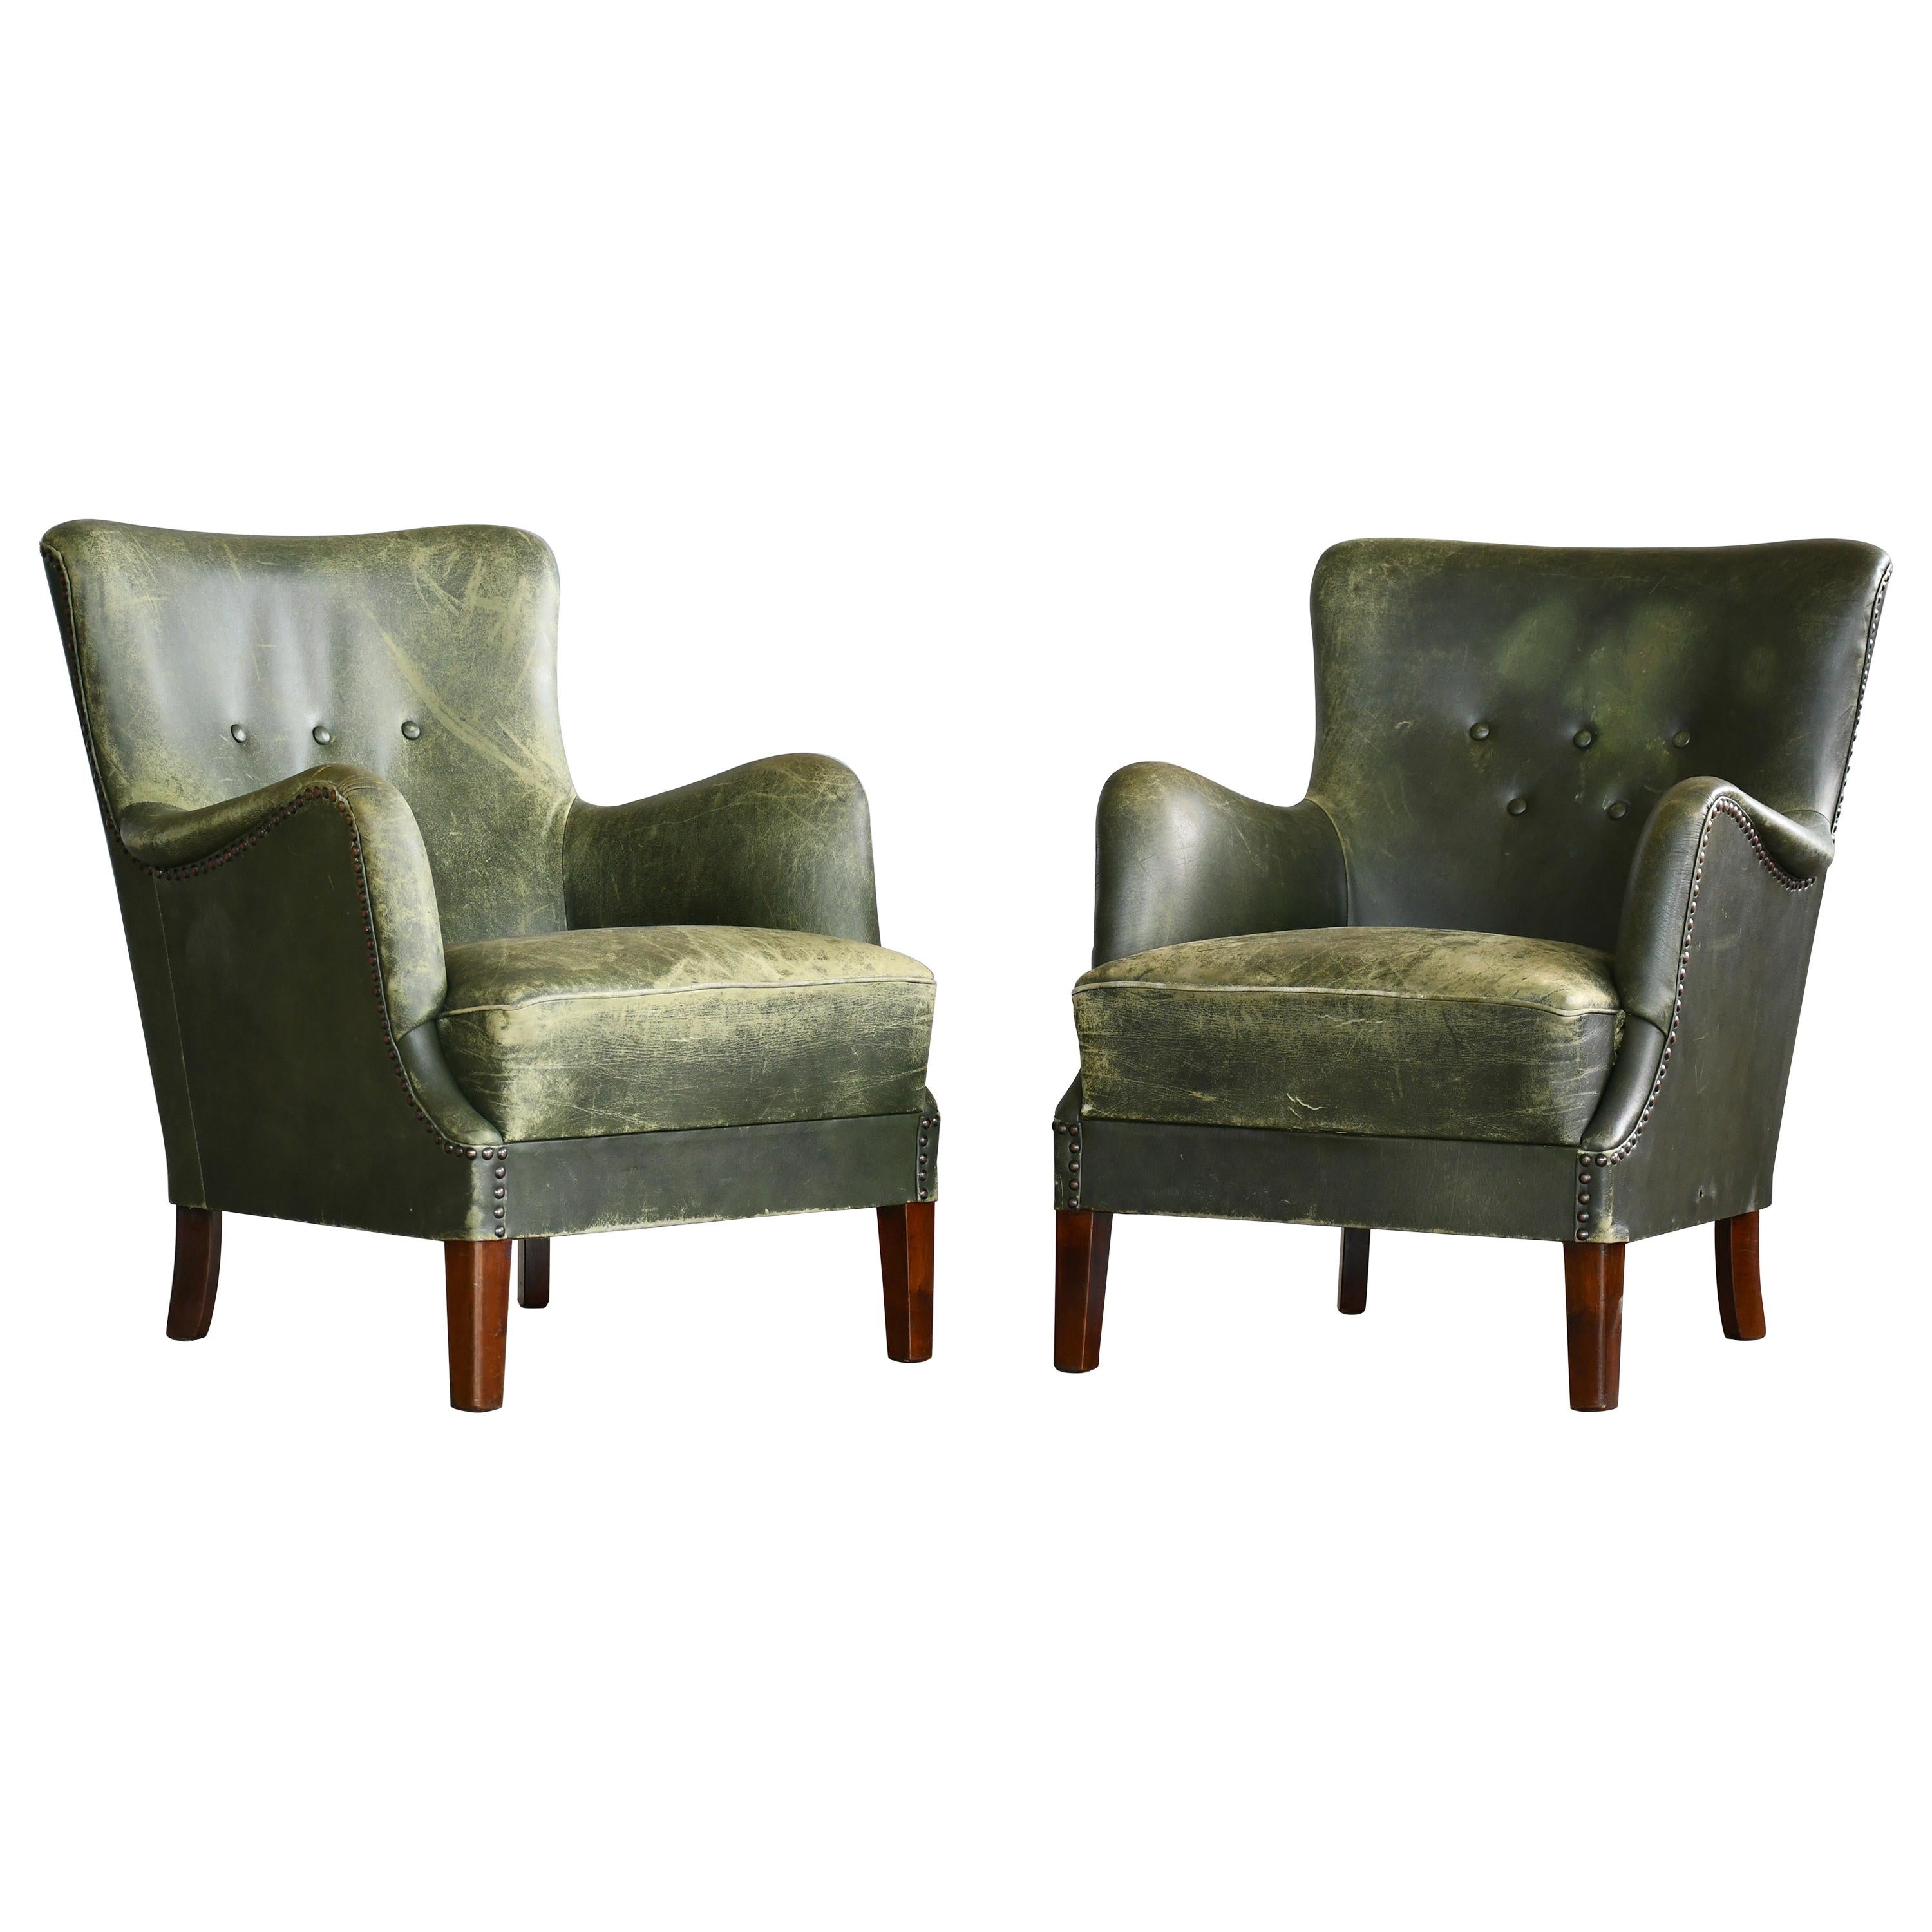 Pair of Danish 1950s Peter Hvidt Attributed Lounge Chairs Green Leather